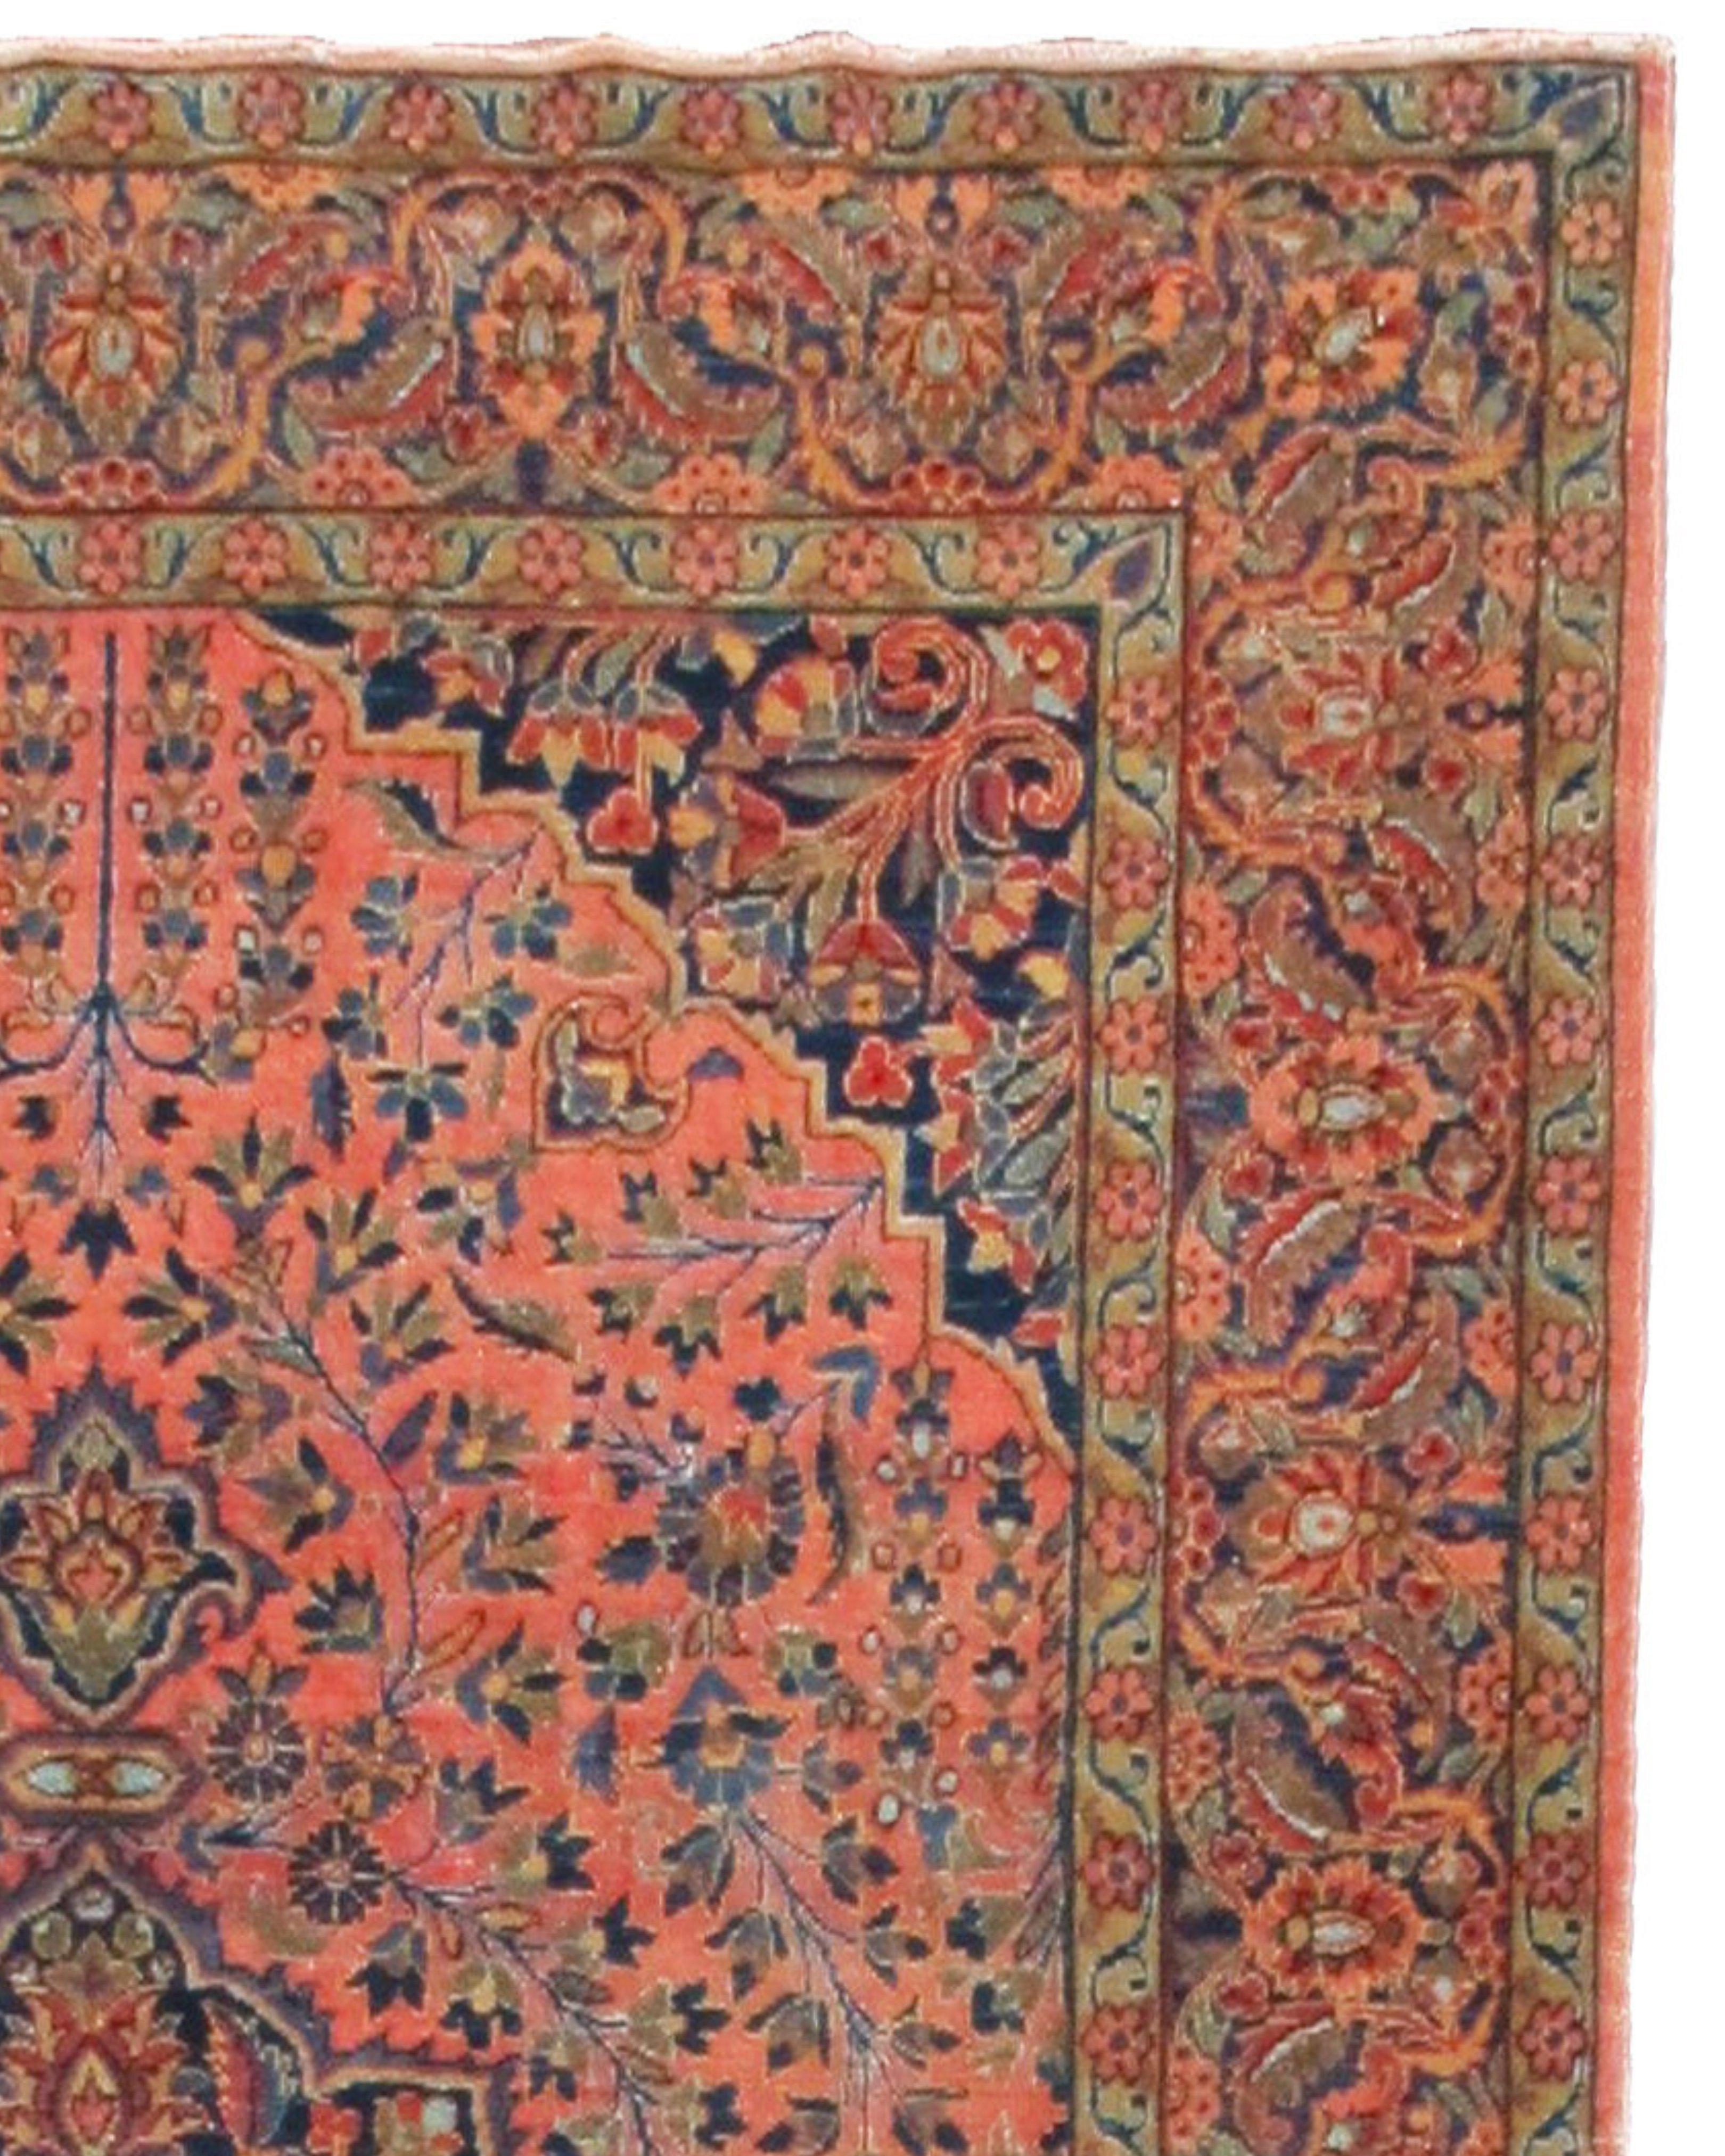 Antique Persian Kashan Rug, Early 20th Century

Additional information:
Dimensions: 4'2